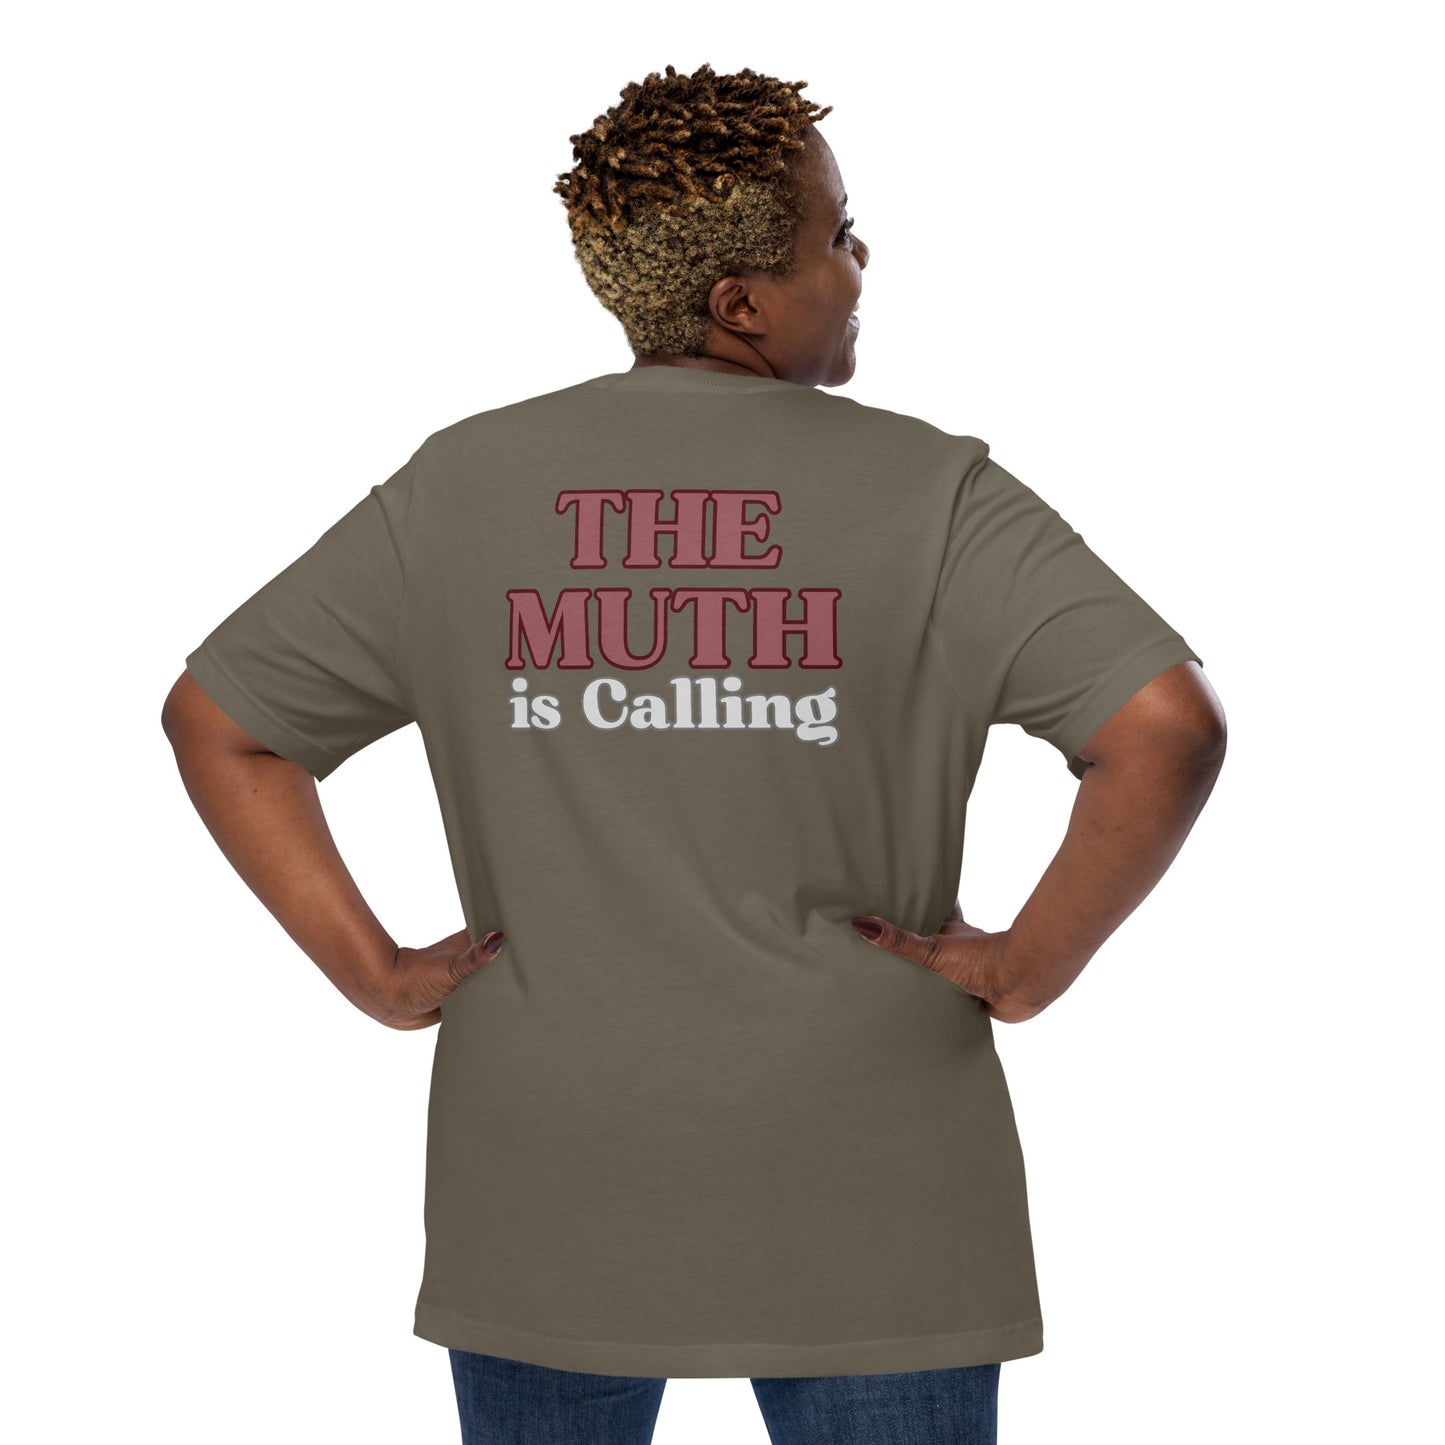 The MUTH is calling! Unisex t-shirt